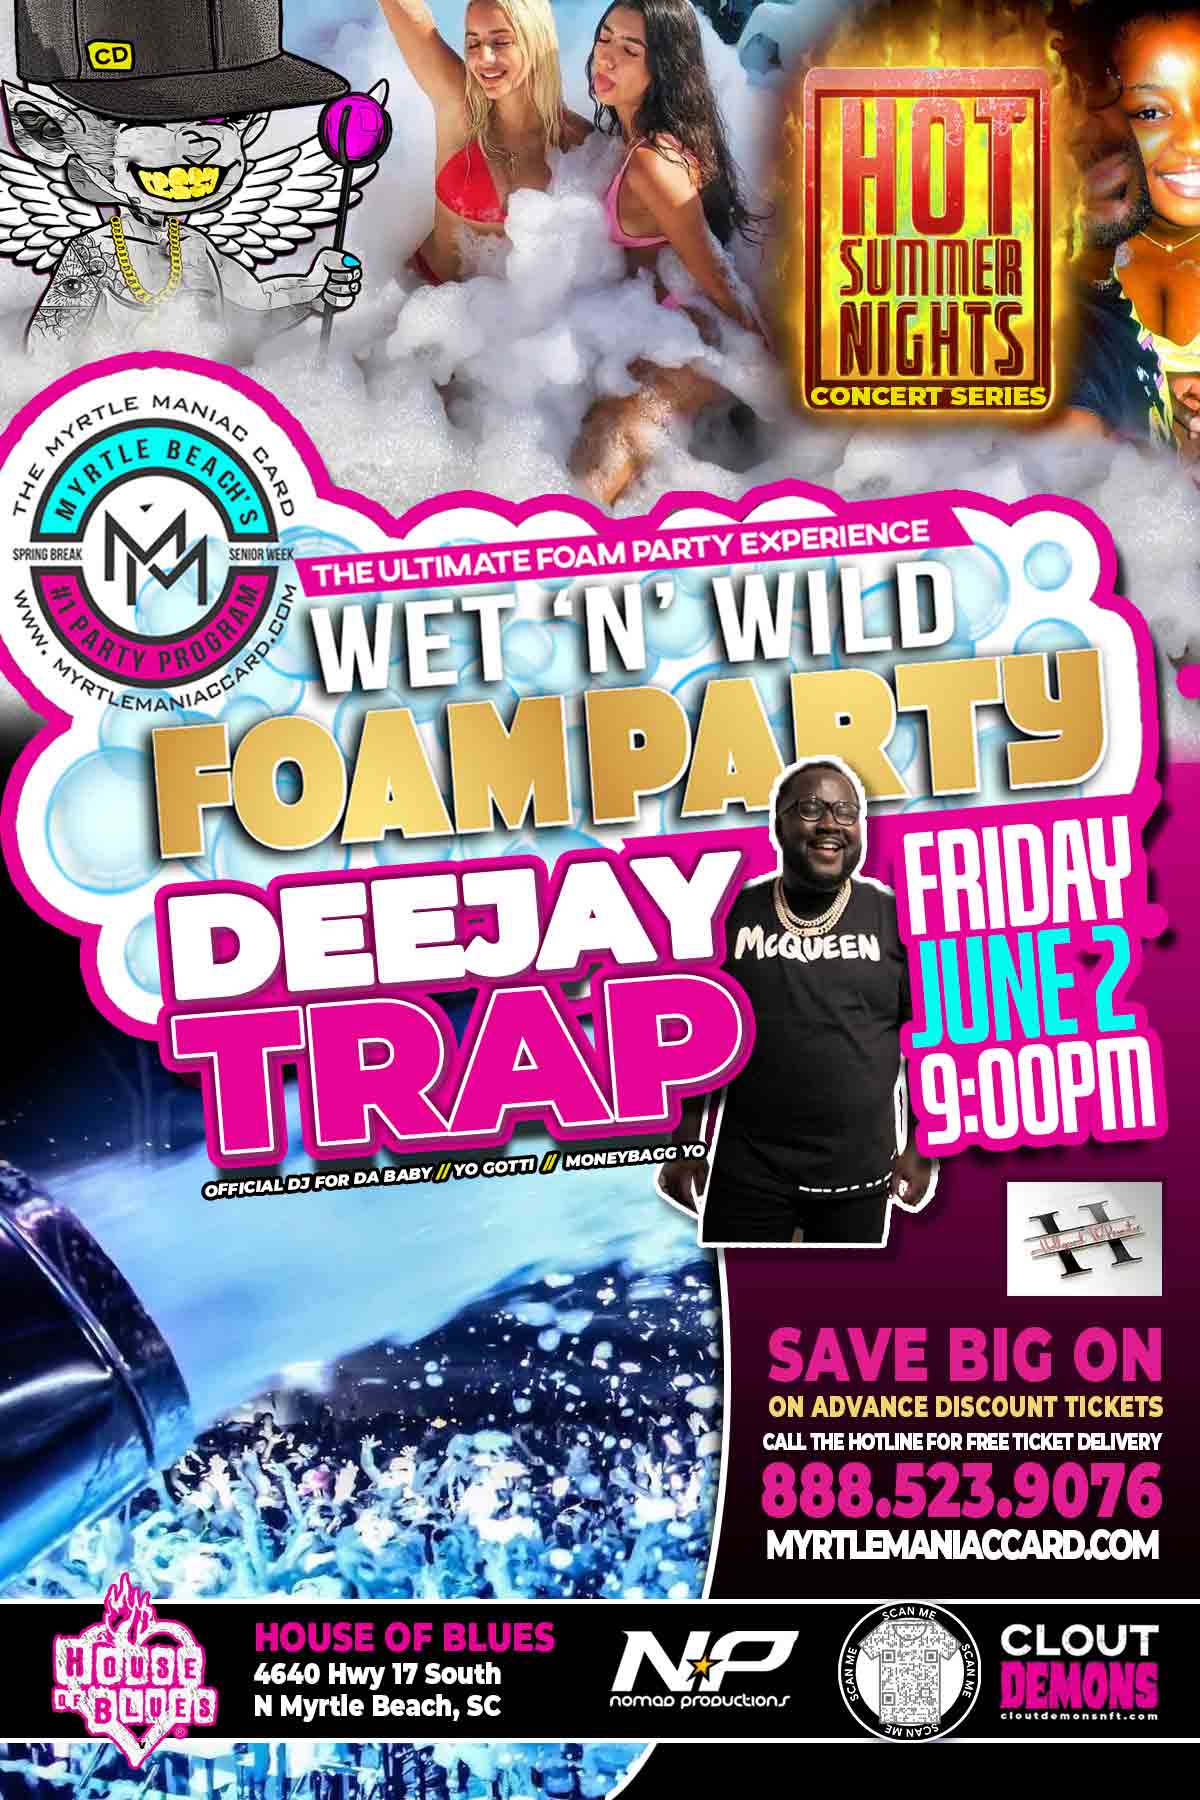 Clout Demons Clothing x Myrtle Maniac x Hollywood the Promotor present DEEJAY TRAP in Concert